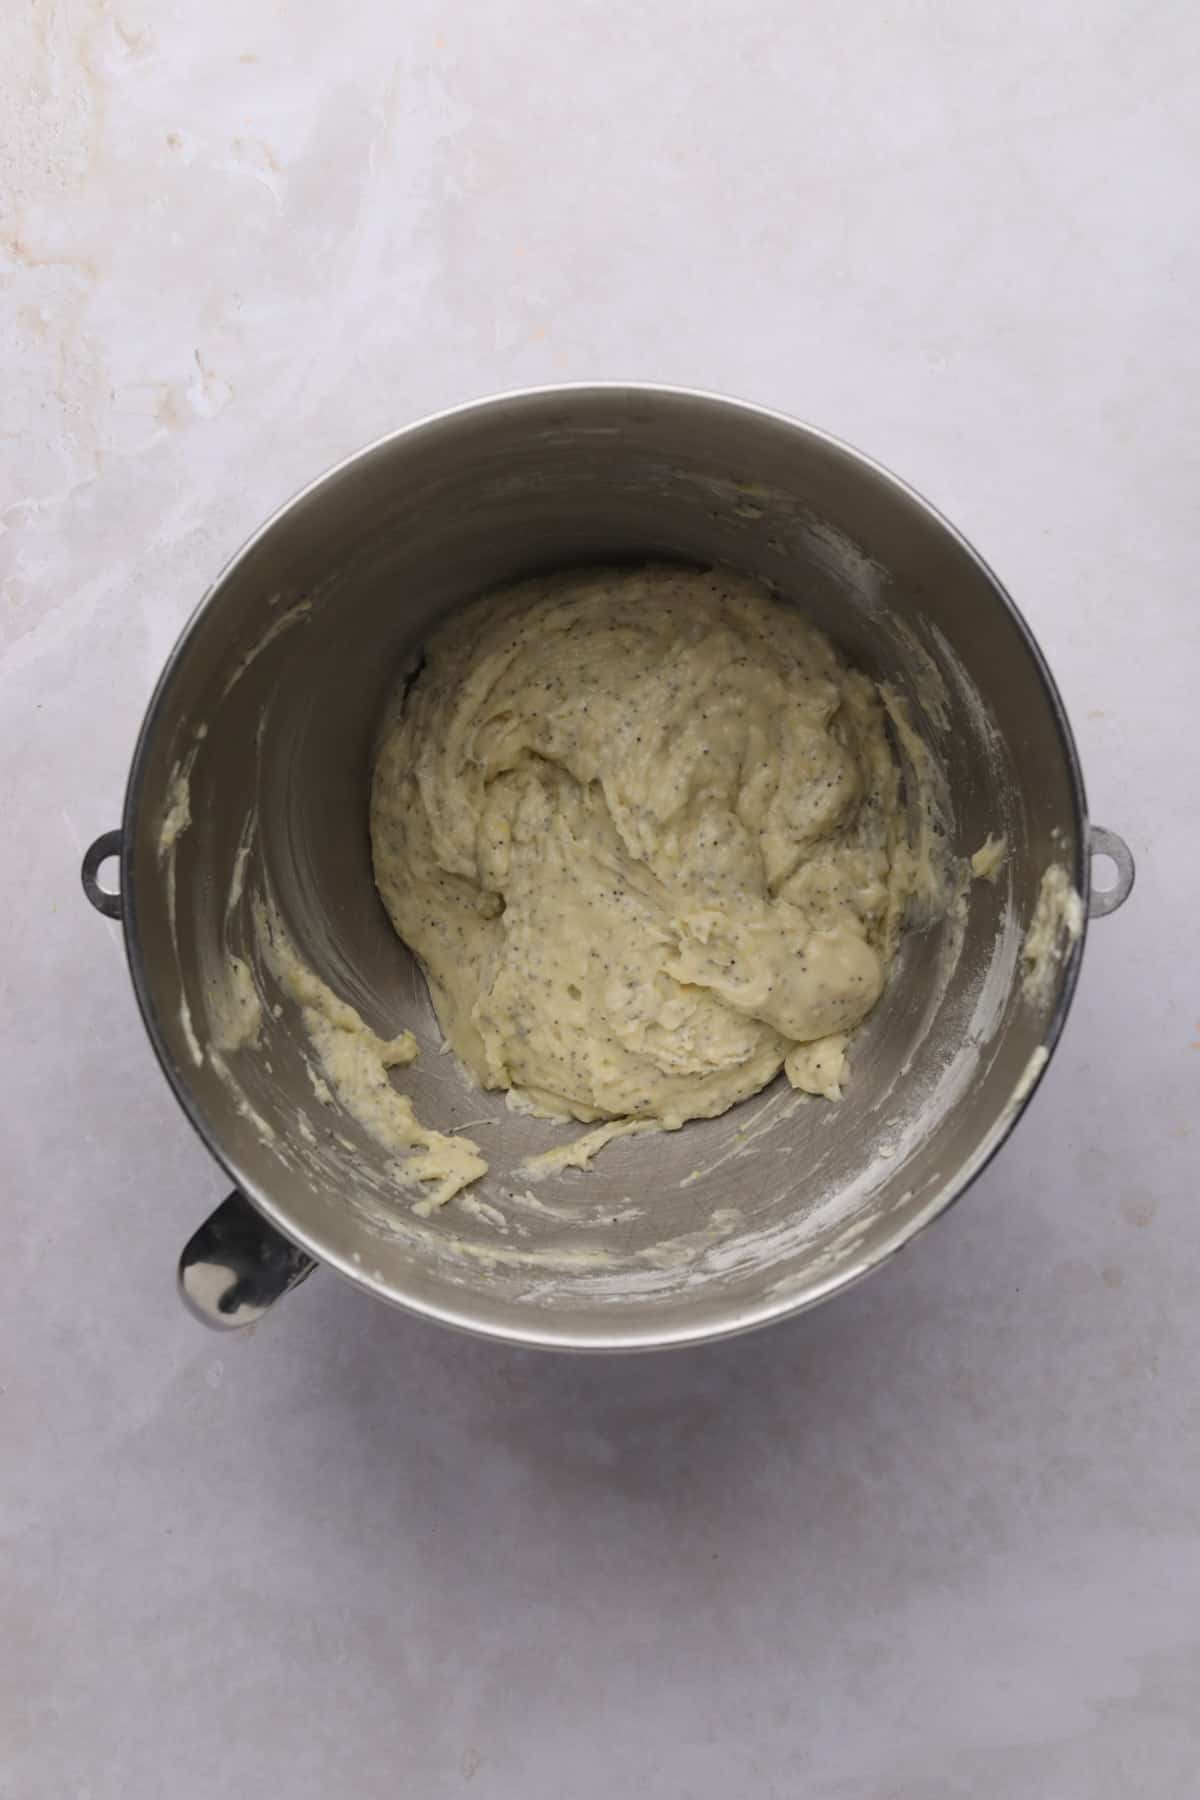 Lemon poppy seed cupcake batter mixed in a metal stand mixer bowl.